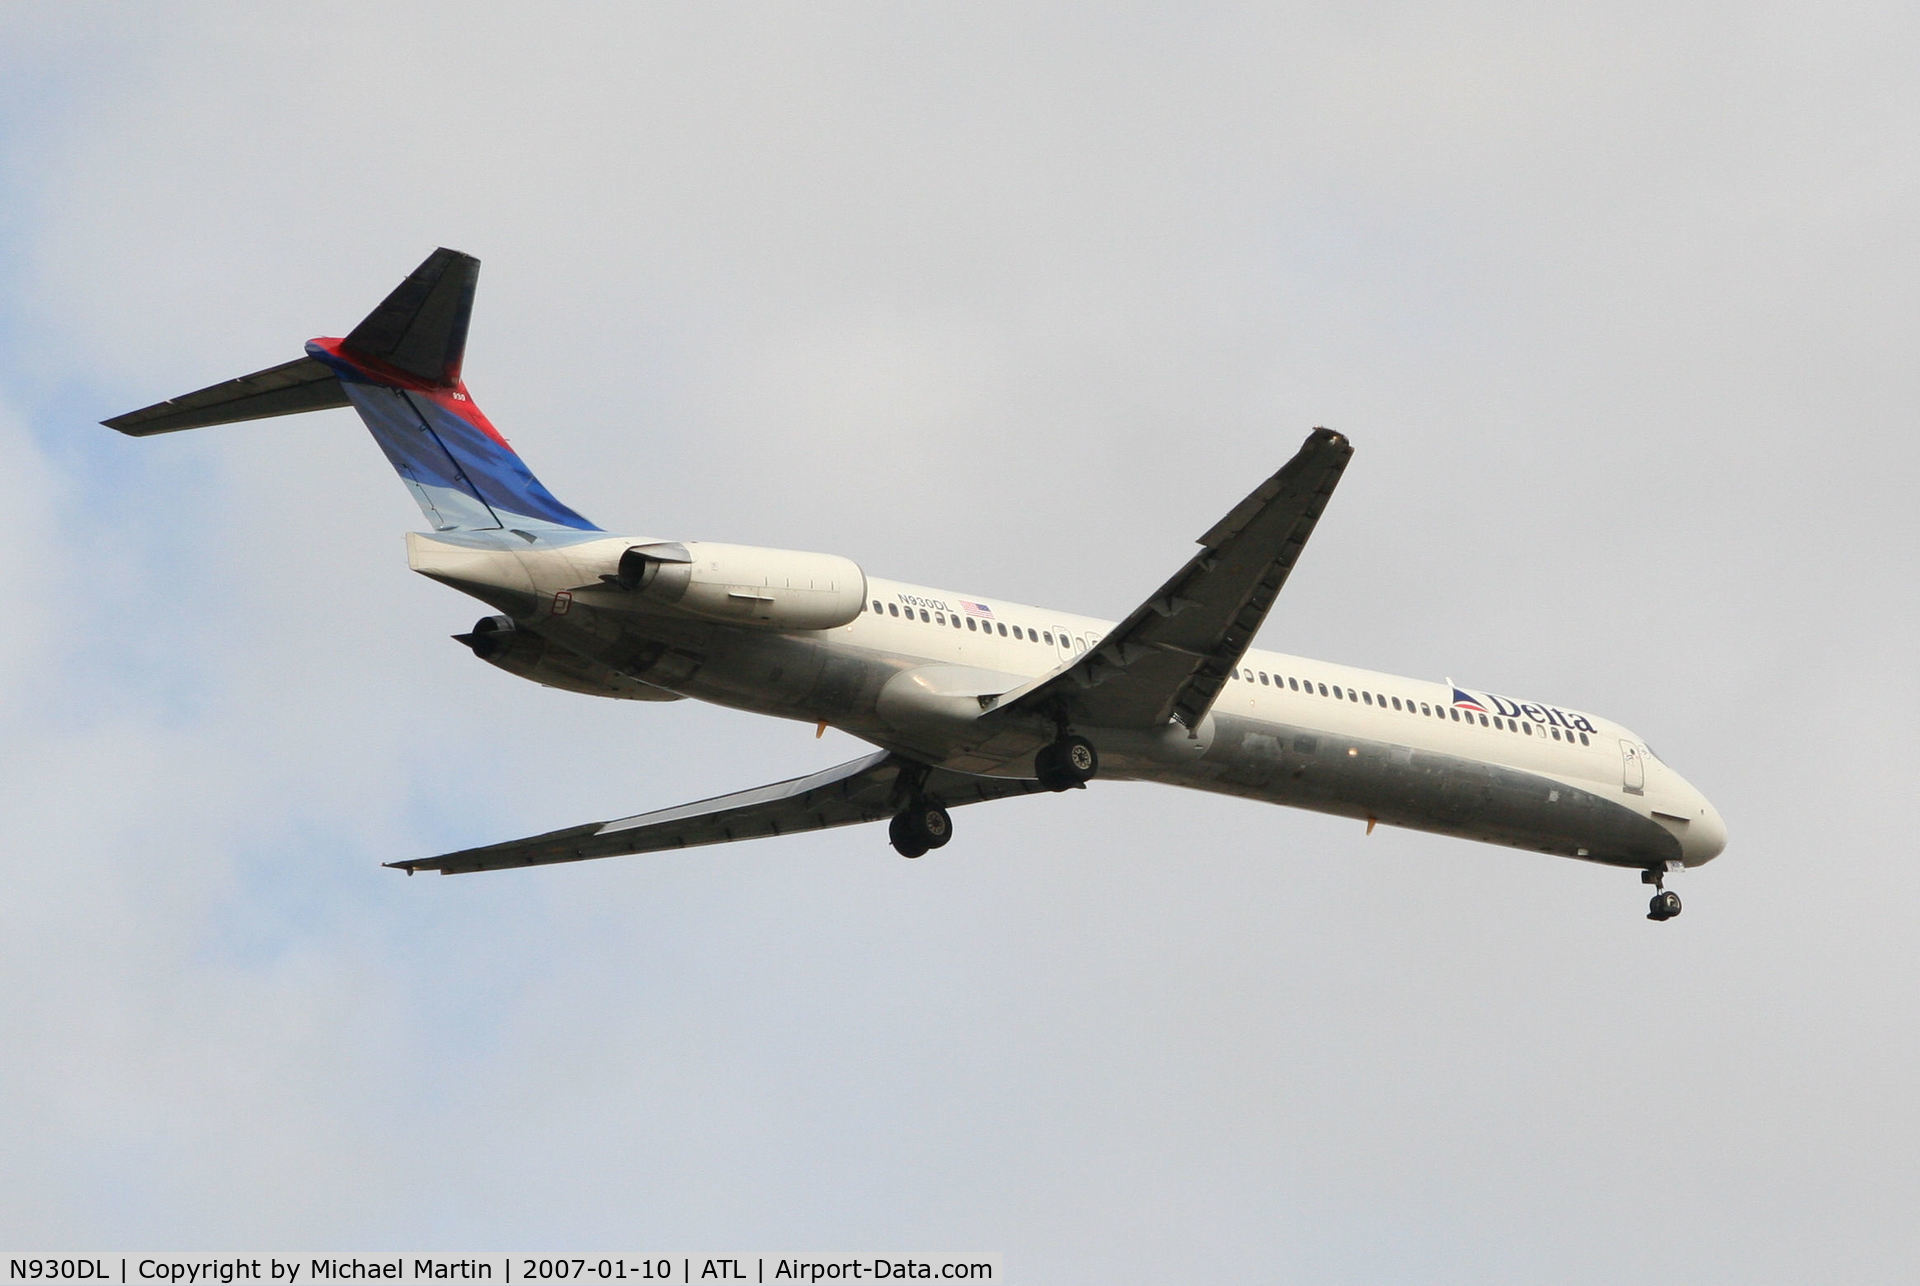 N930DL, 1988 McDonnell Douglas MD-88 C/N 49717, Over the numbers of 9R